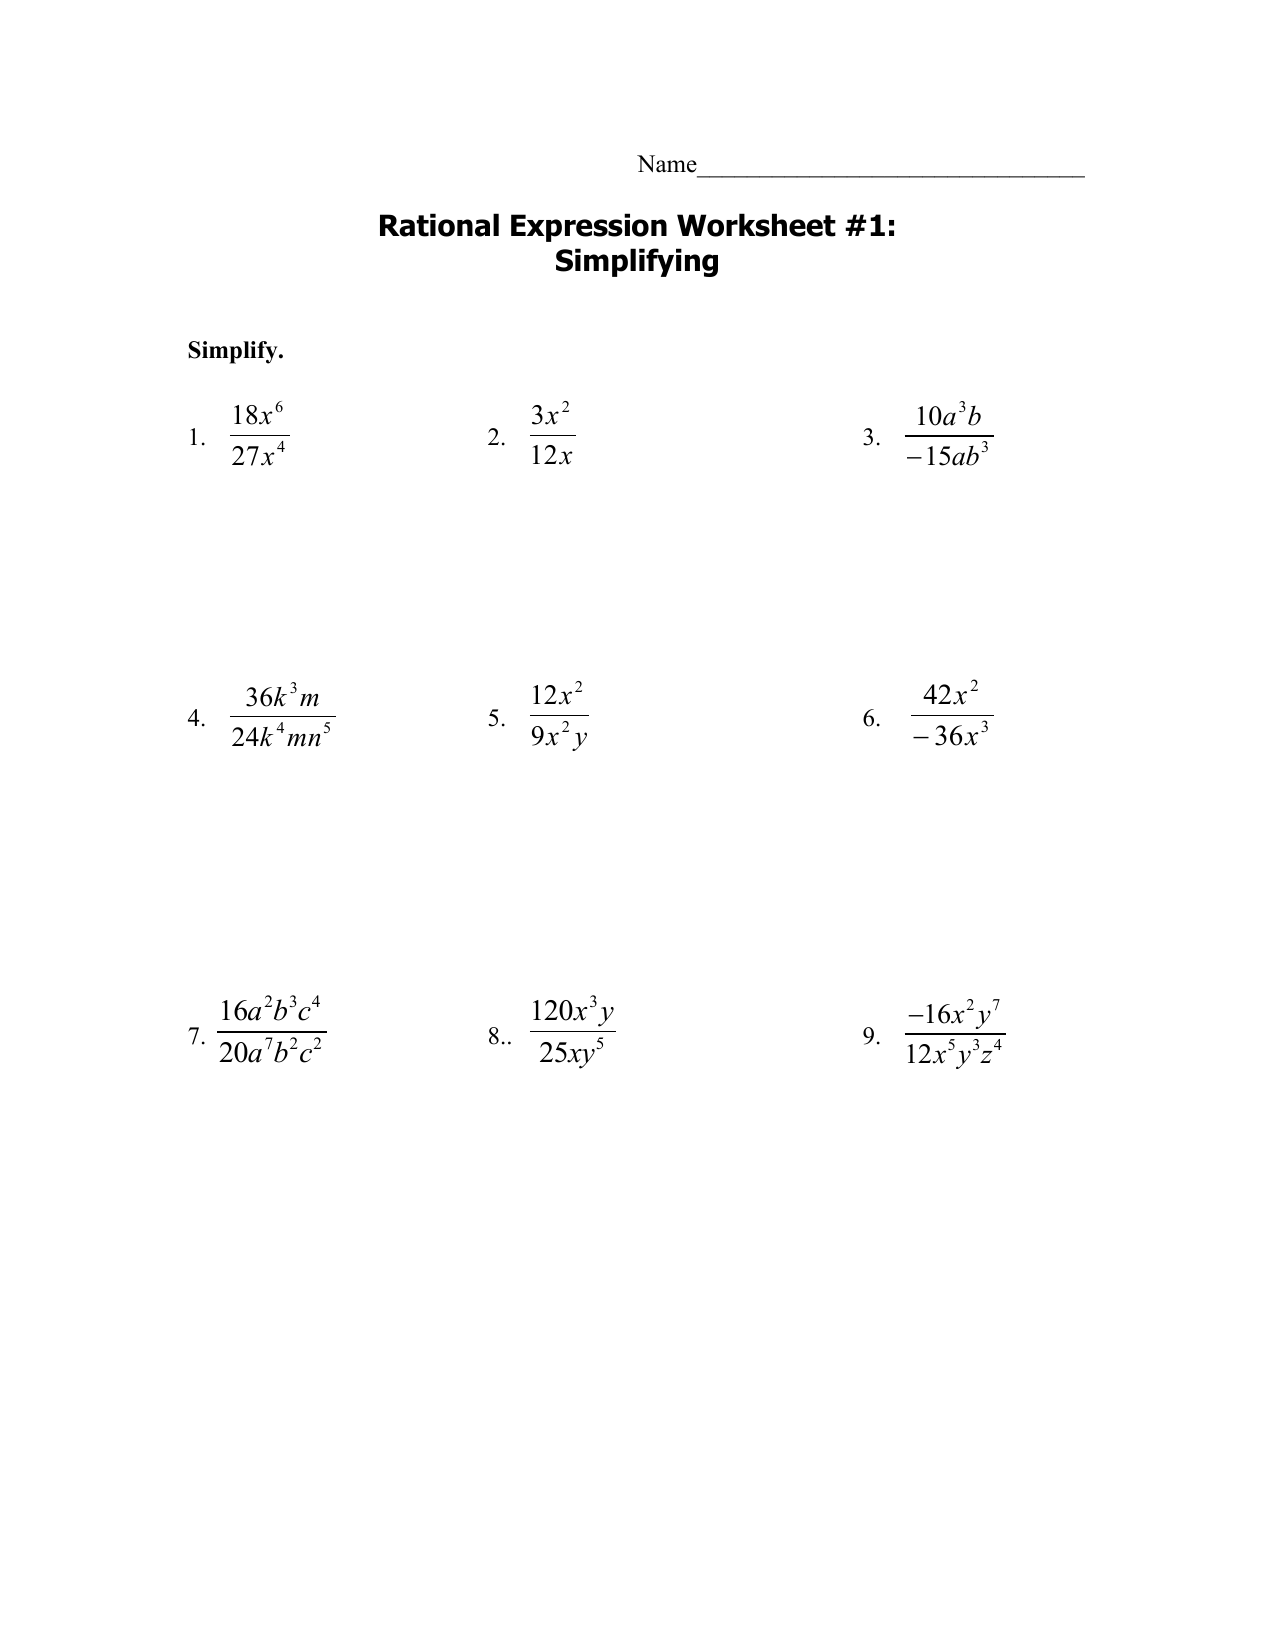 M2221 rationalworksheets221-2221 221 Throughout Multiplying Rational Expressions Worksheet